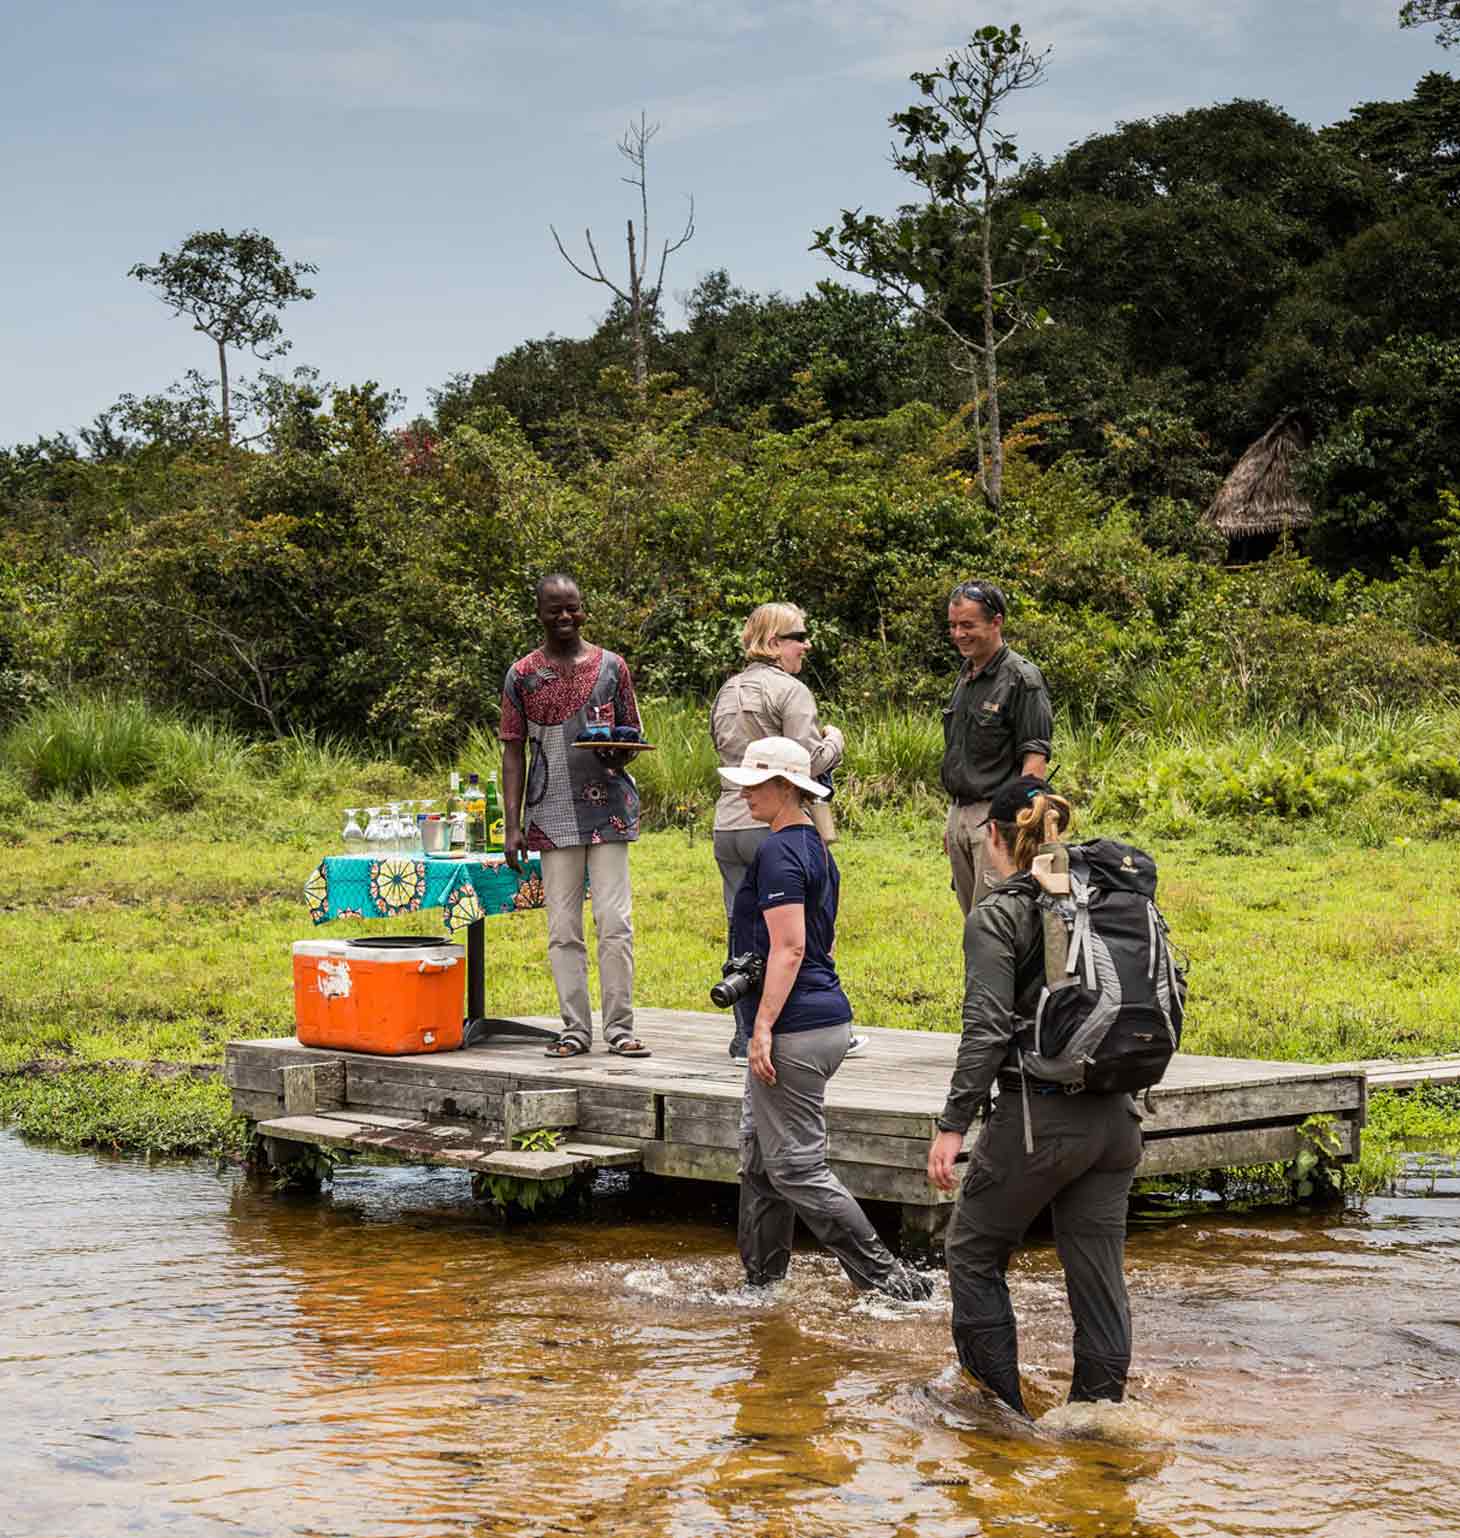 Arriving at Lango Camp to cold drinks in the Republic of Congo